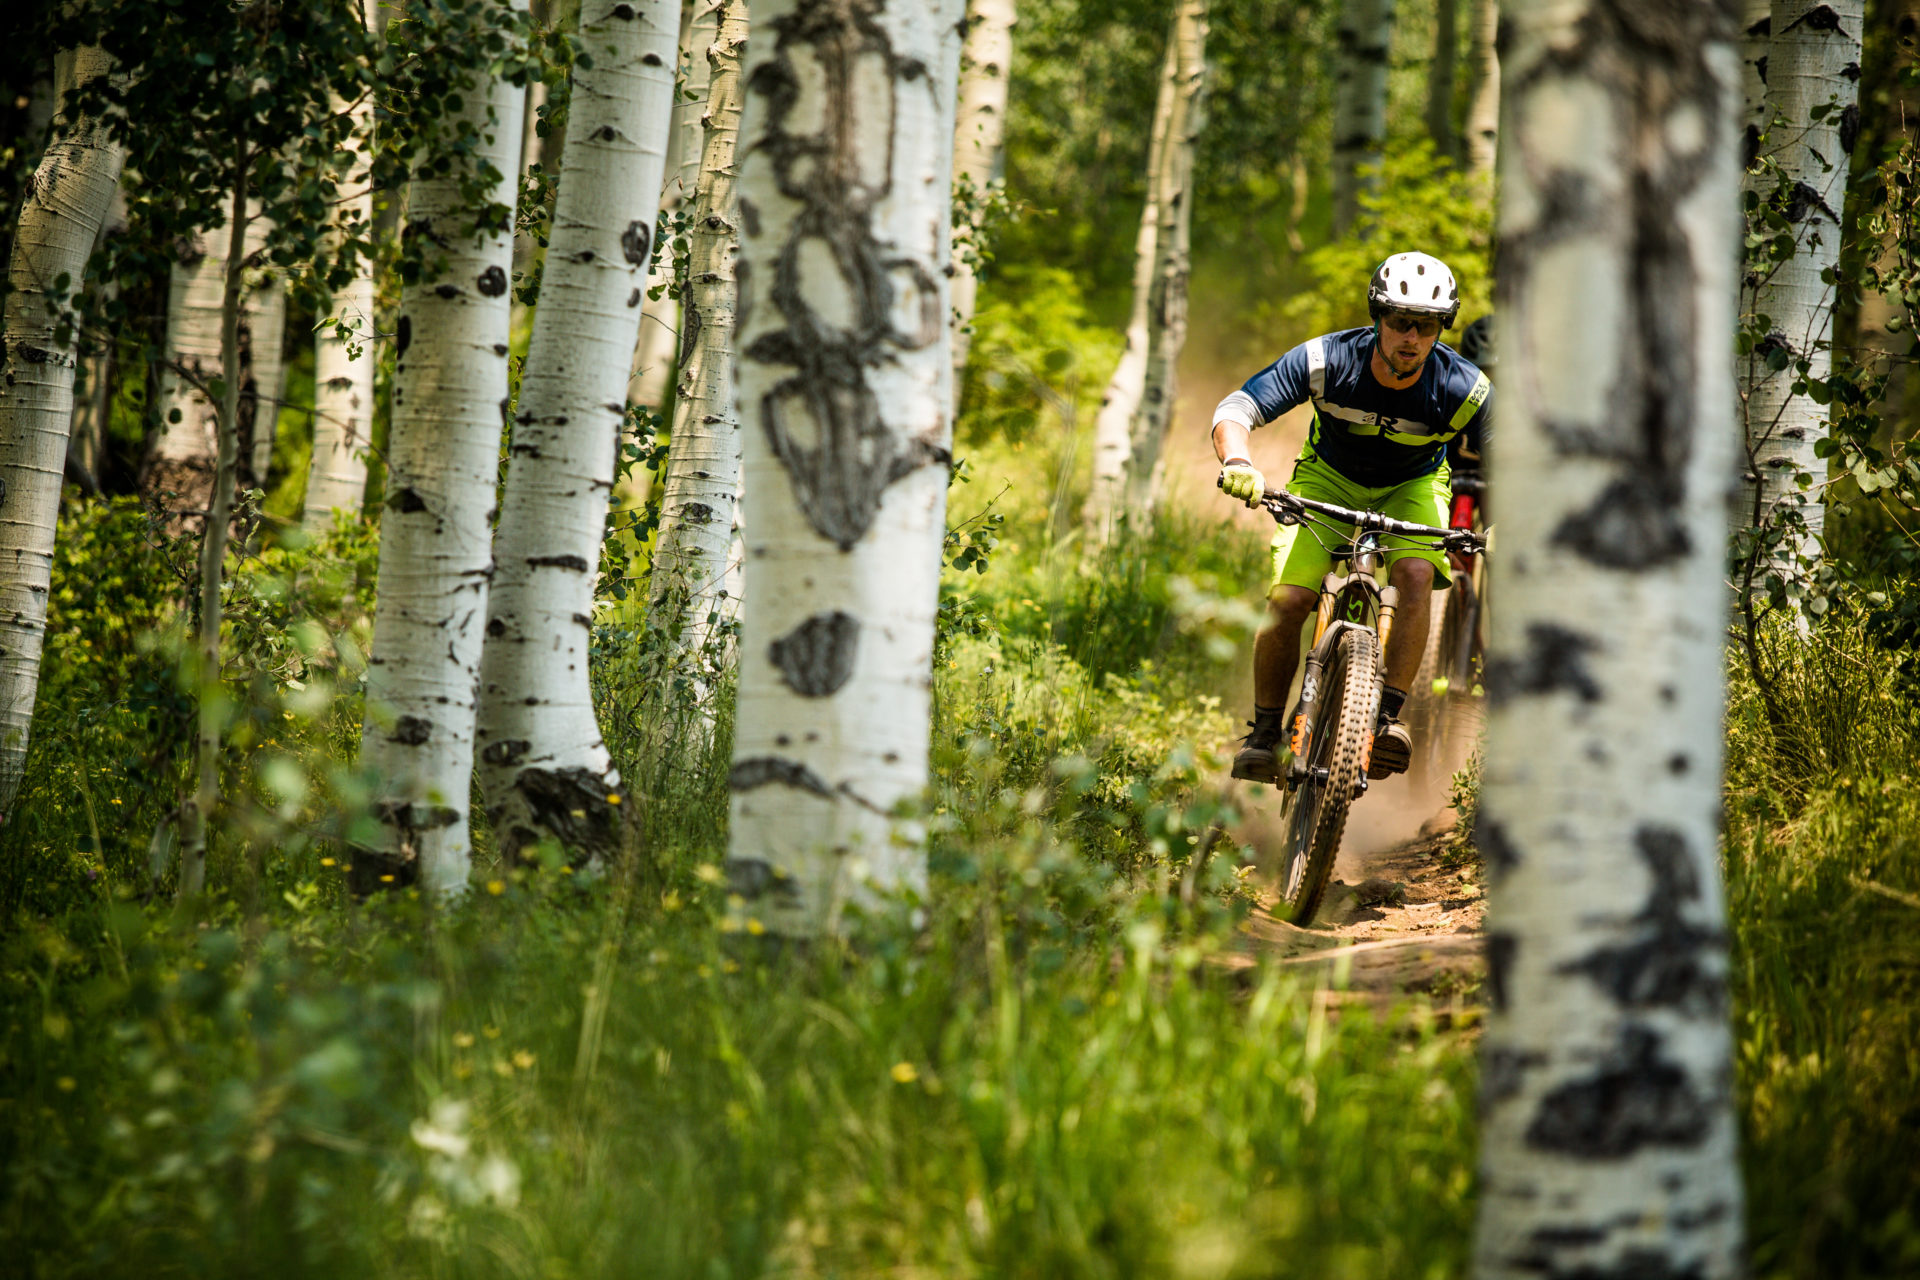 A person rides a mountain bike on a singletrack trail toward the camera. They are surrounded by aspen trees.